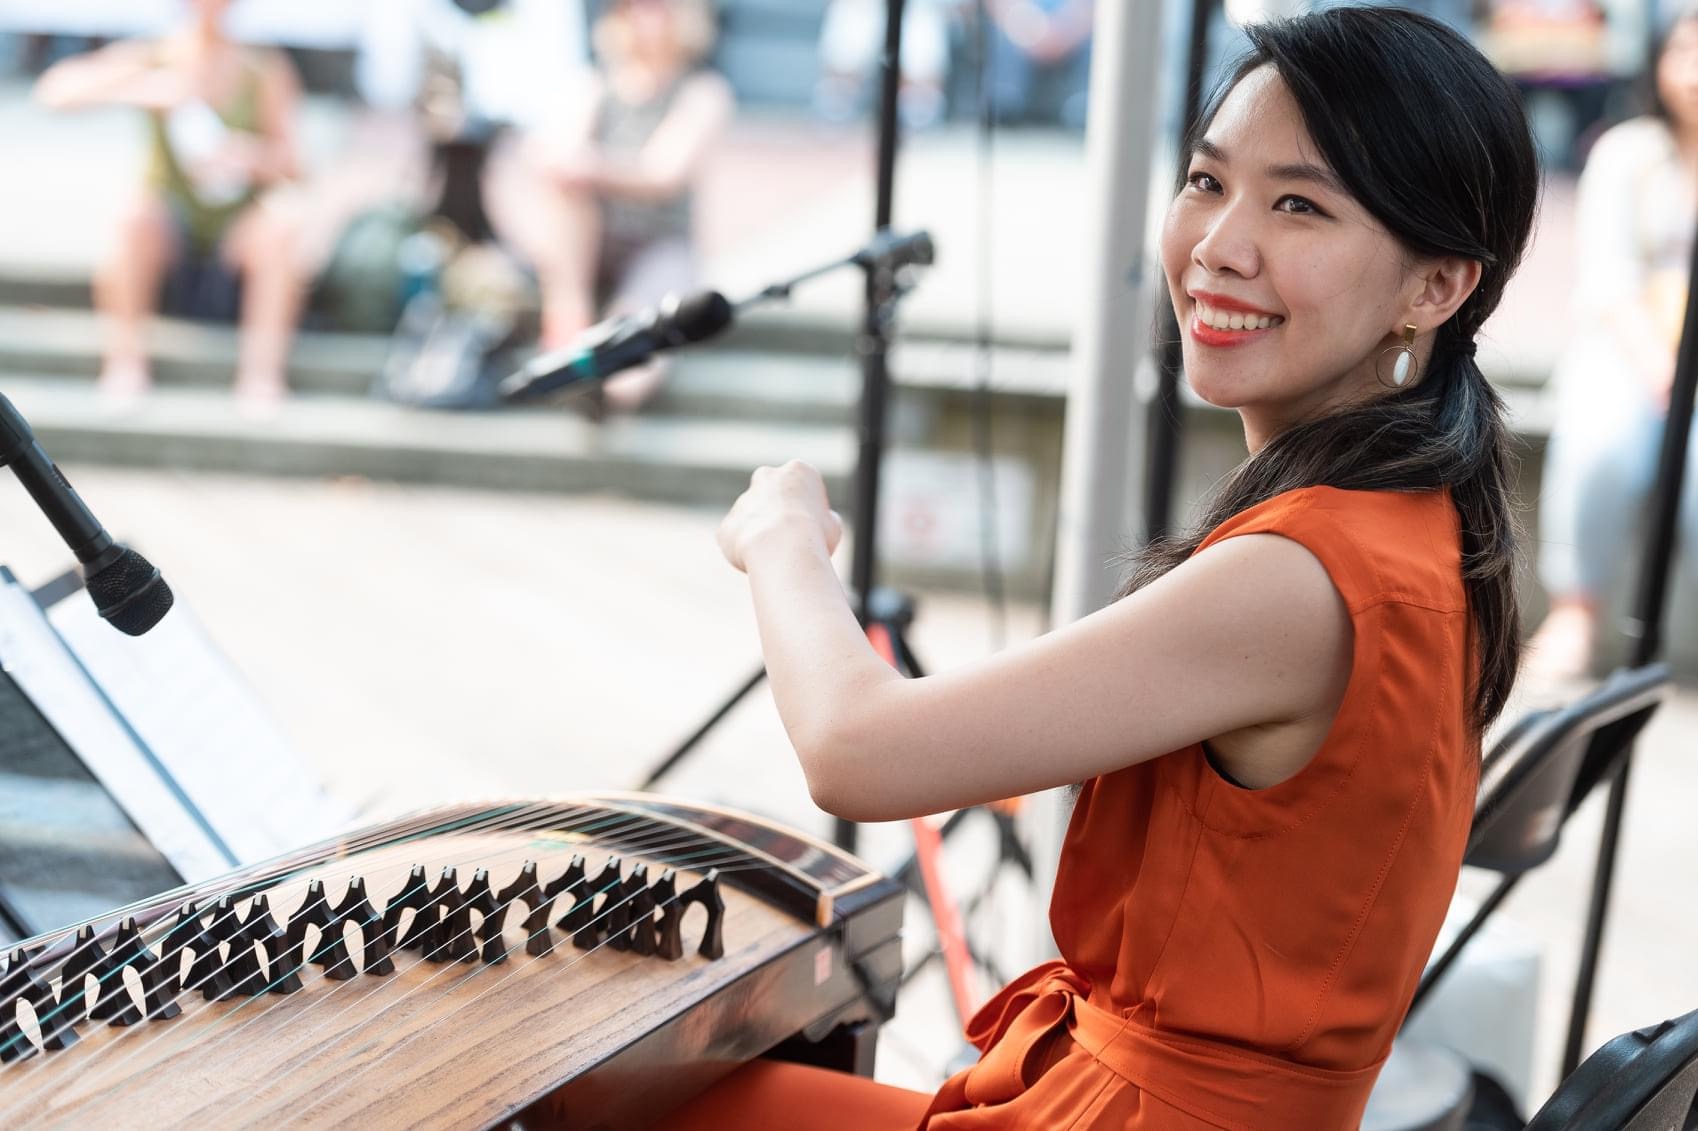 Dailin Hsieh, smiling in an orange dress, performing on the zheng